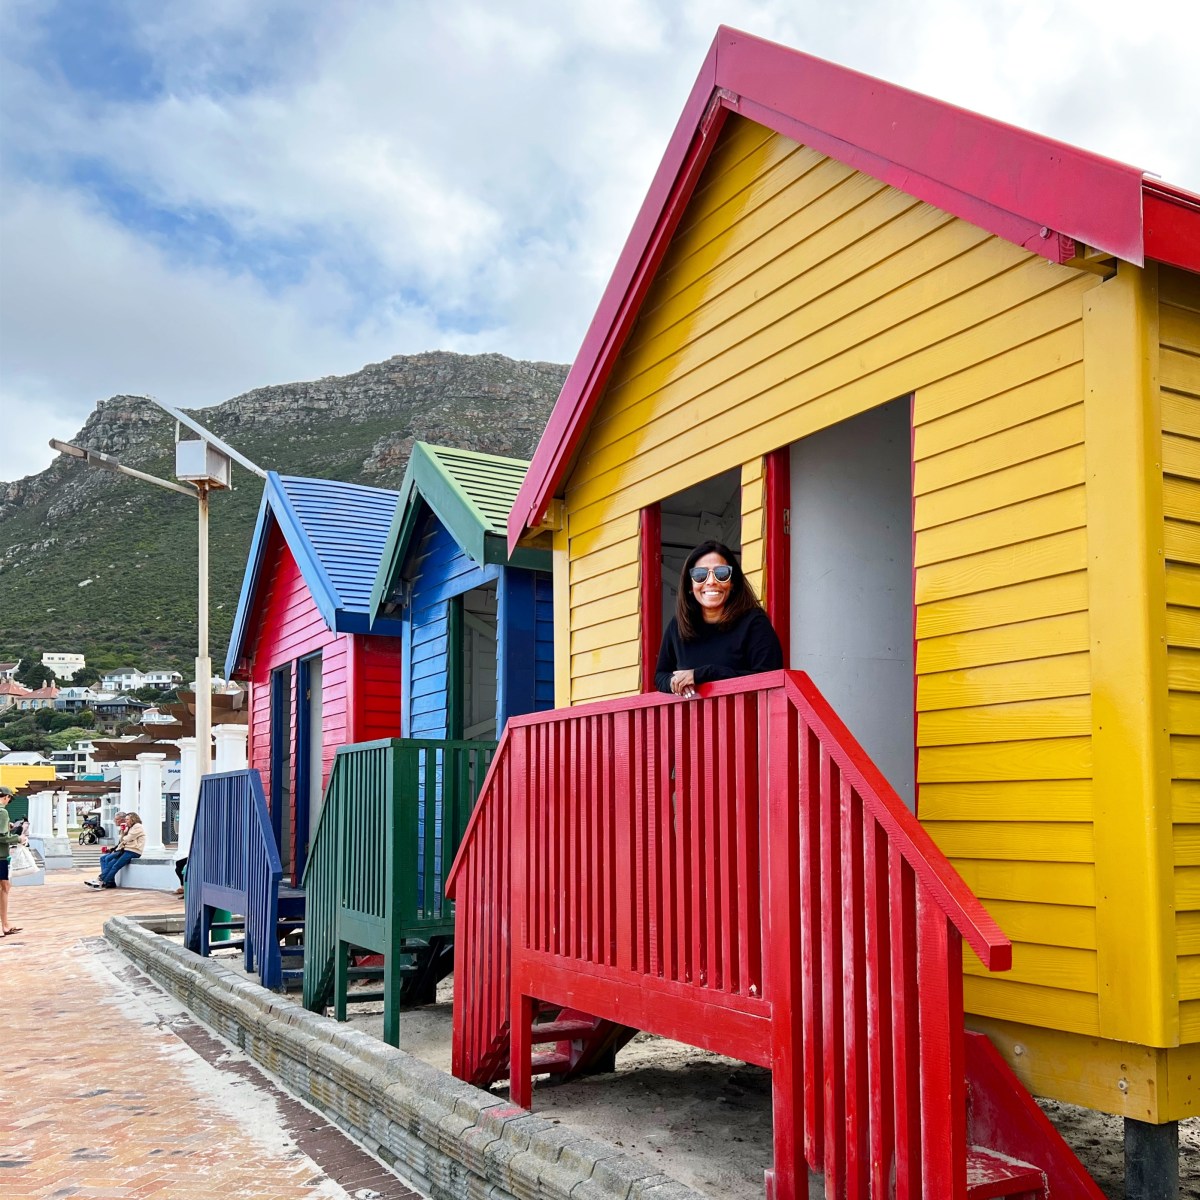 Tips for South Africa for Solo Female Travelers